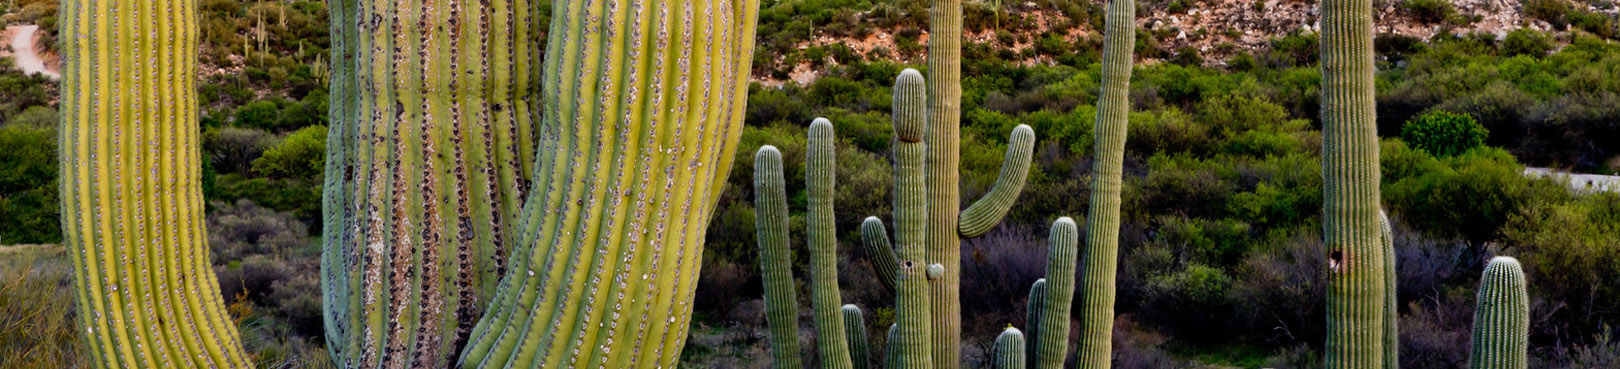 Numerous saguaros as seen from a trail at Catalina State Park in the foreground with thick, green desert brush in the distance..